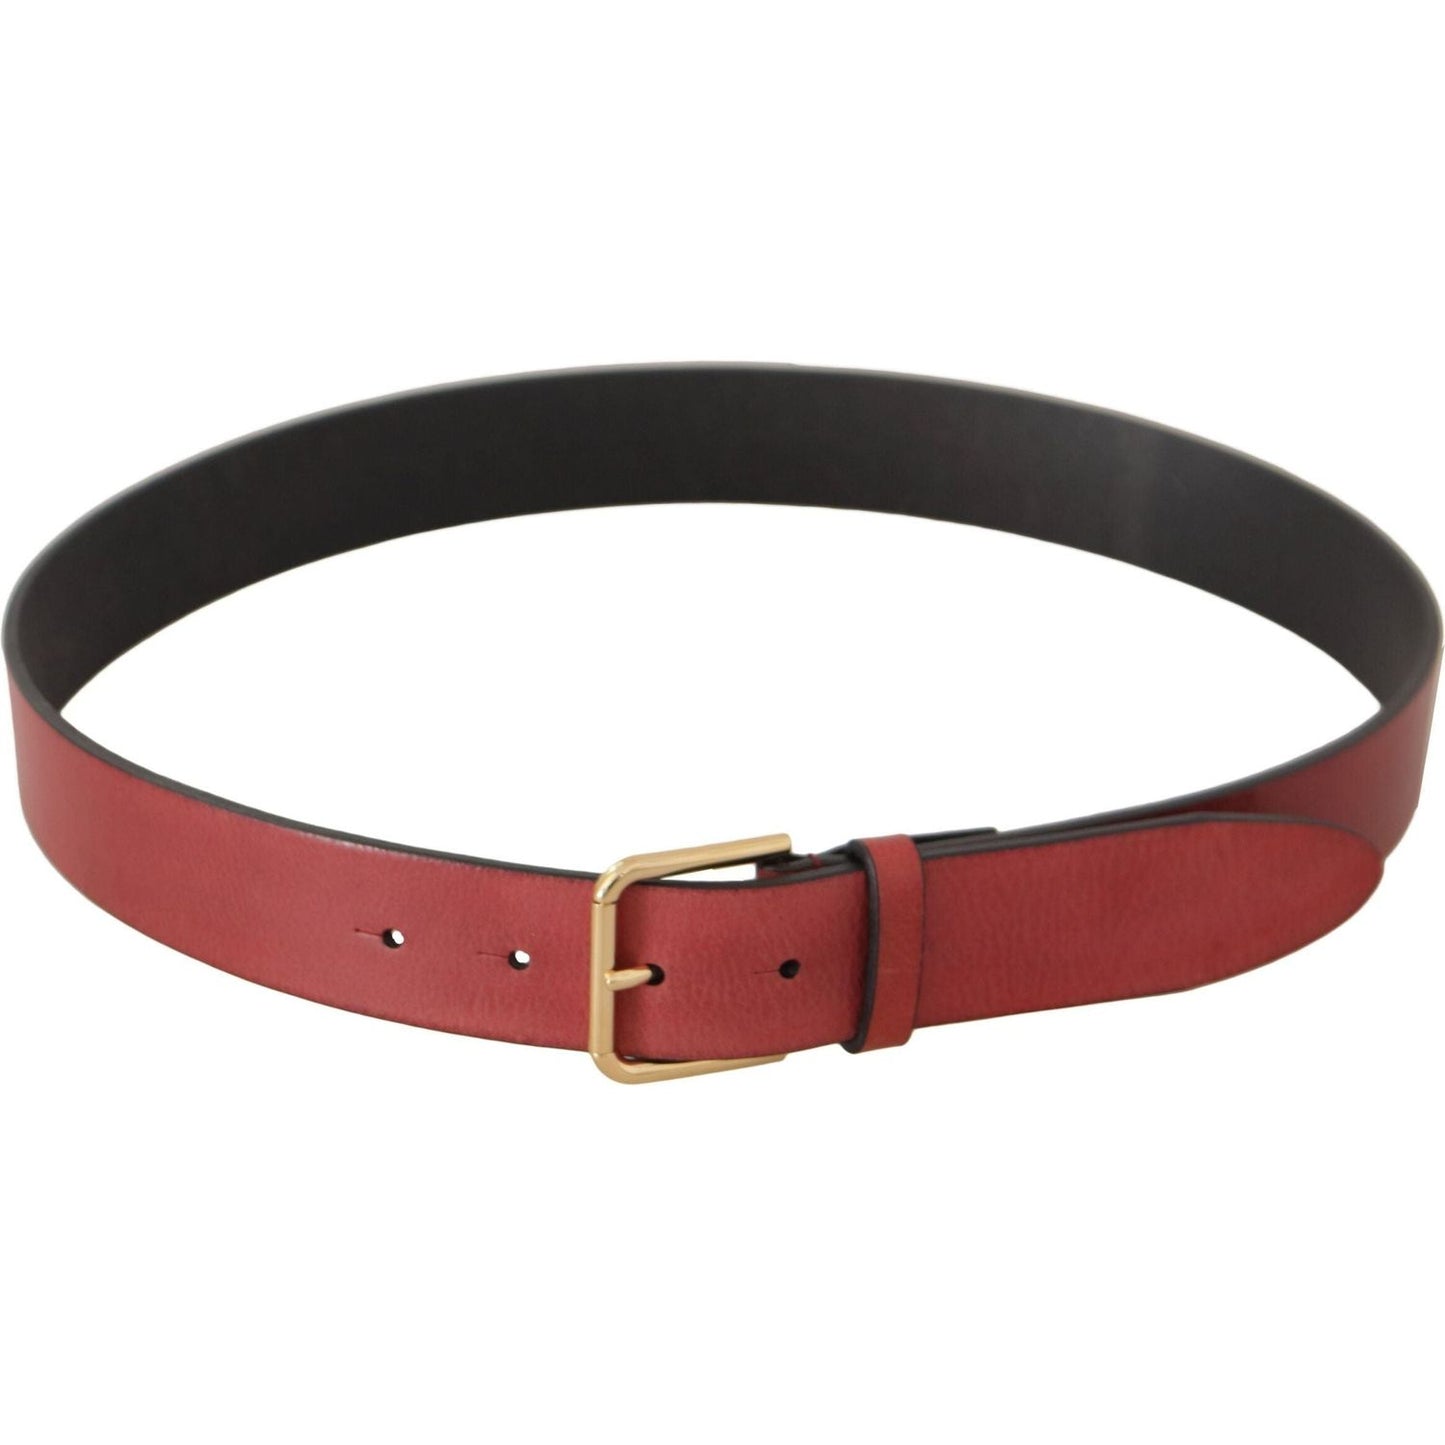 Dolce & Gabbana Elegant Red Leather Belt with Engraved Buckle red-leather-gold-logo-engraved-metal-buckle-belt IMG_0738-1-scaled-076c3e0f-2ac.jpg